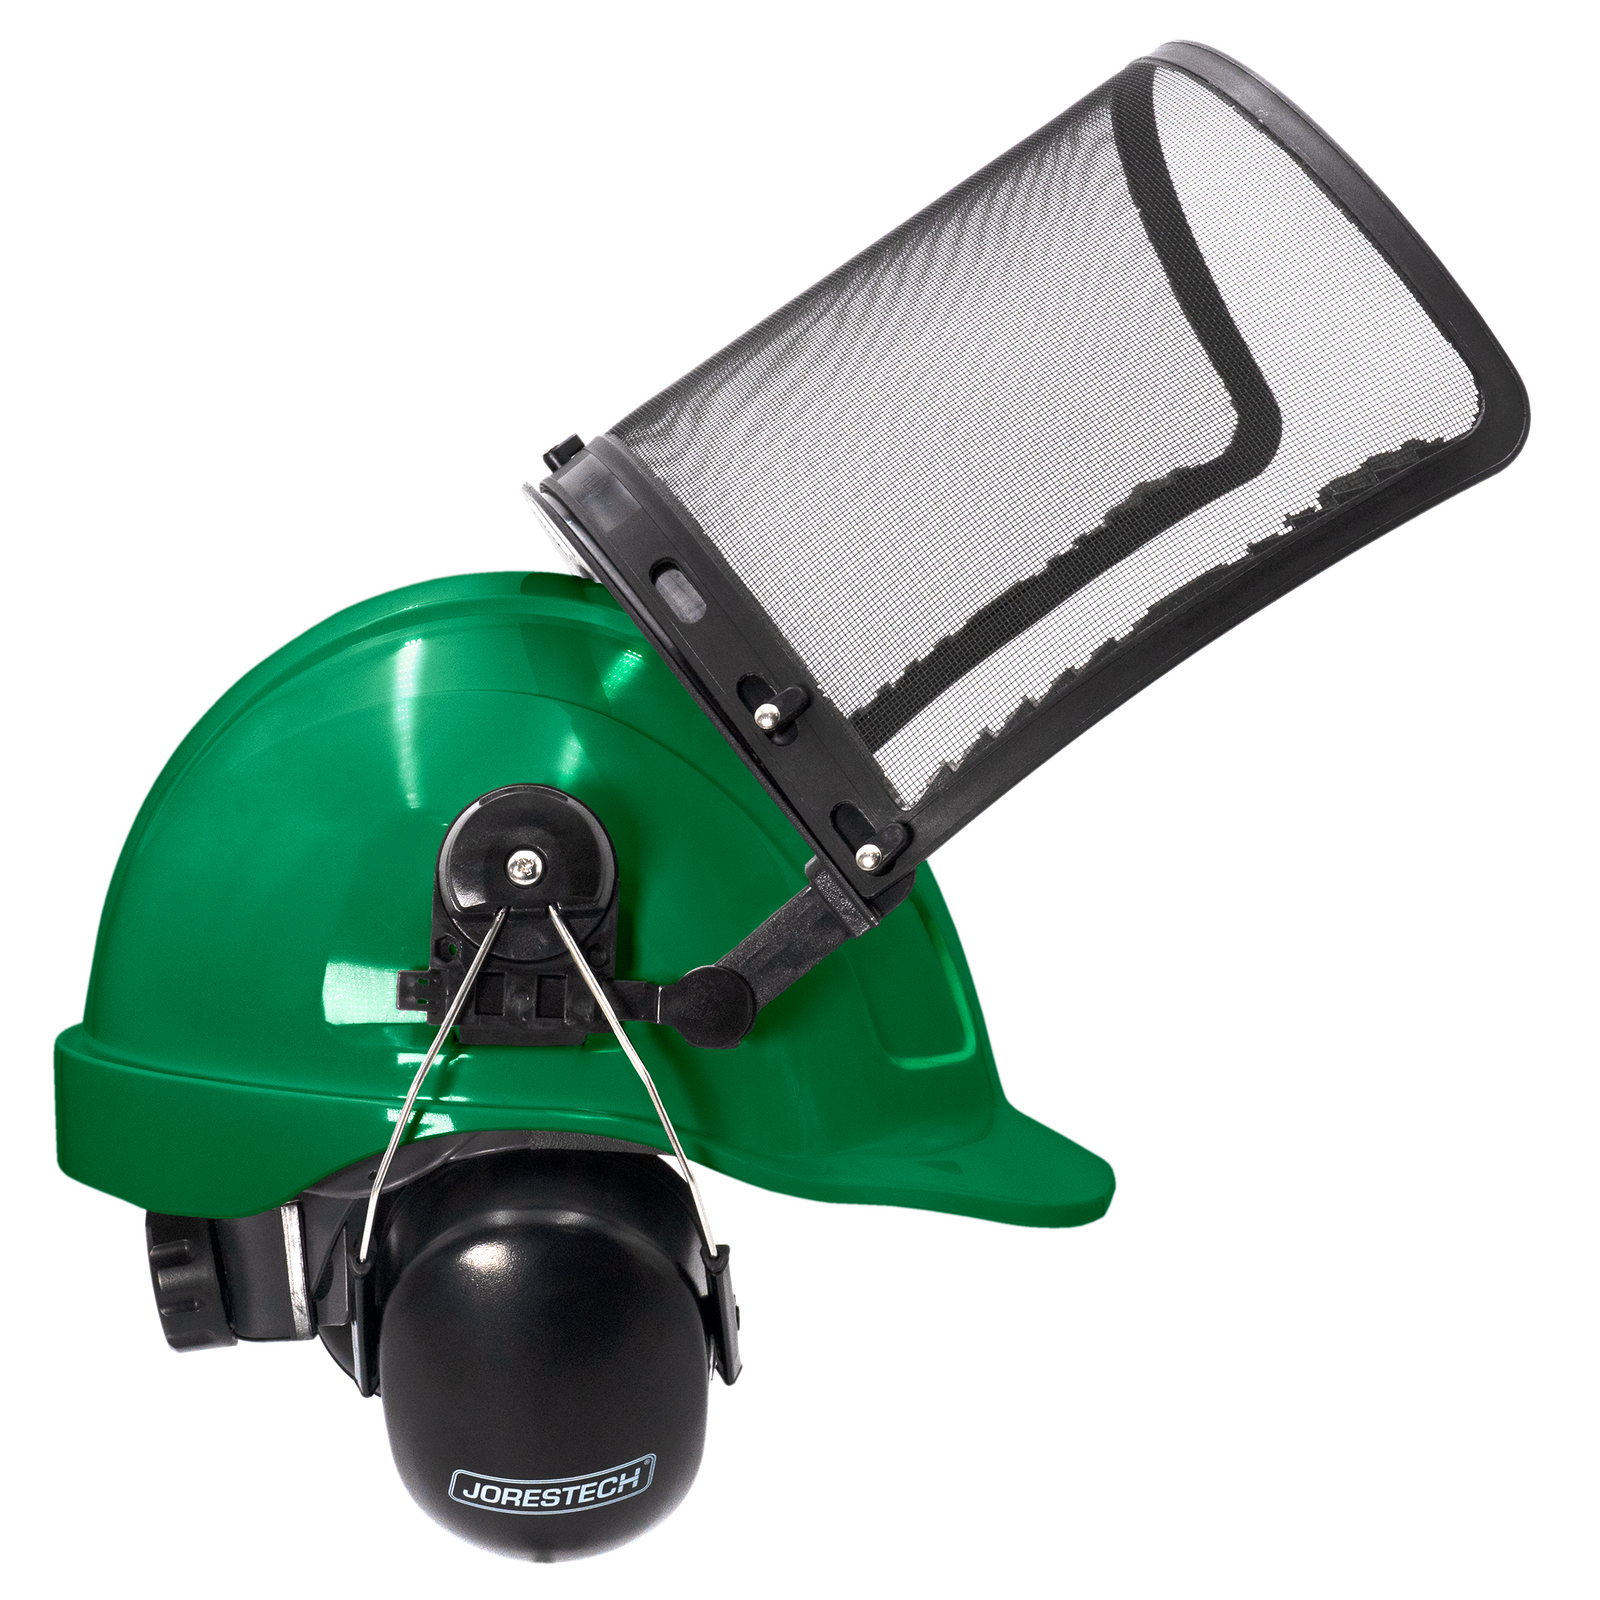 Green safety cap style hard hat kit with iron mesh face shield and earmuffs for hearing protection